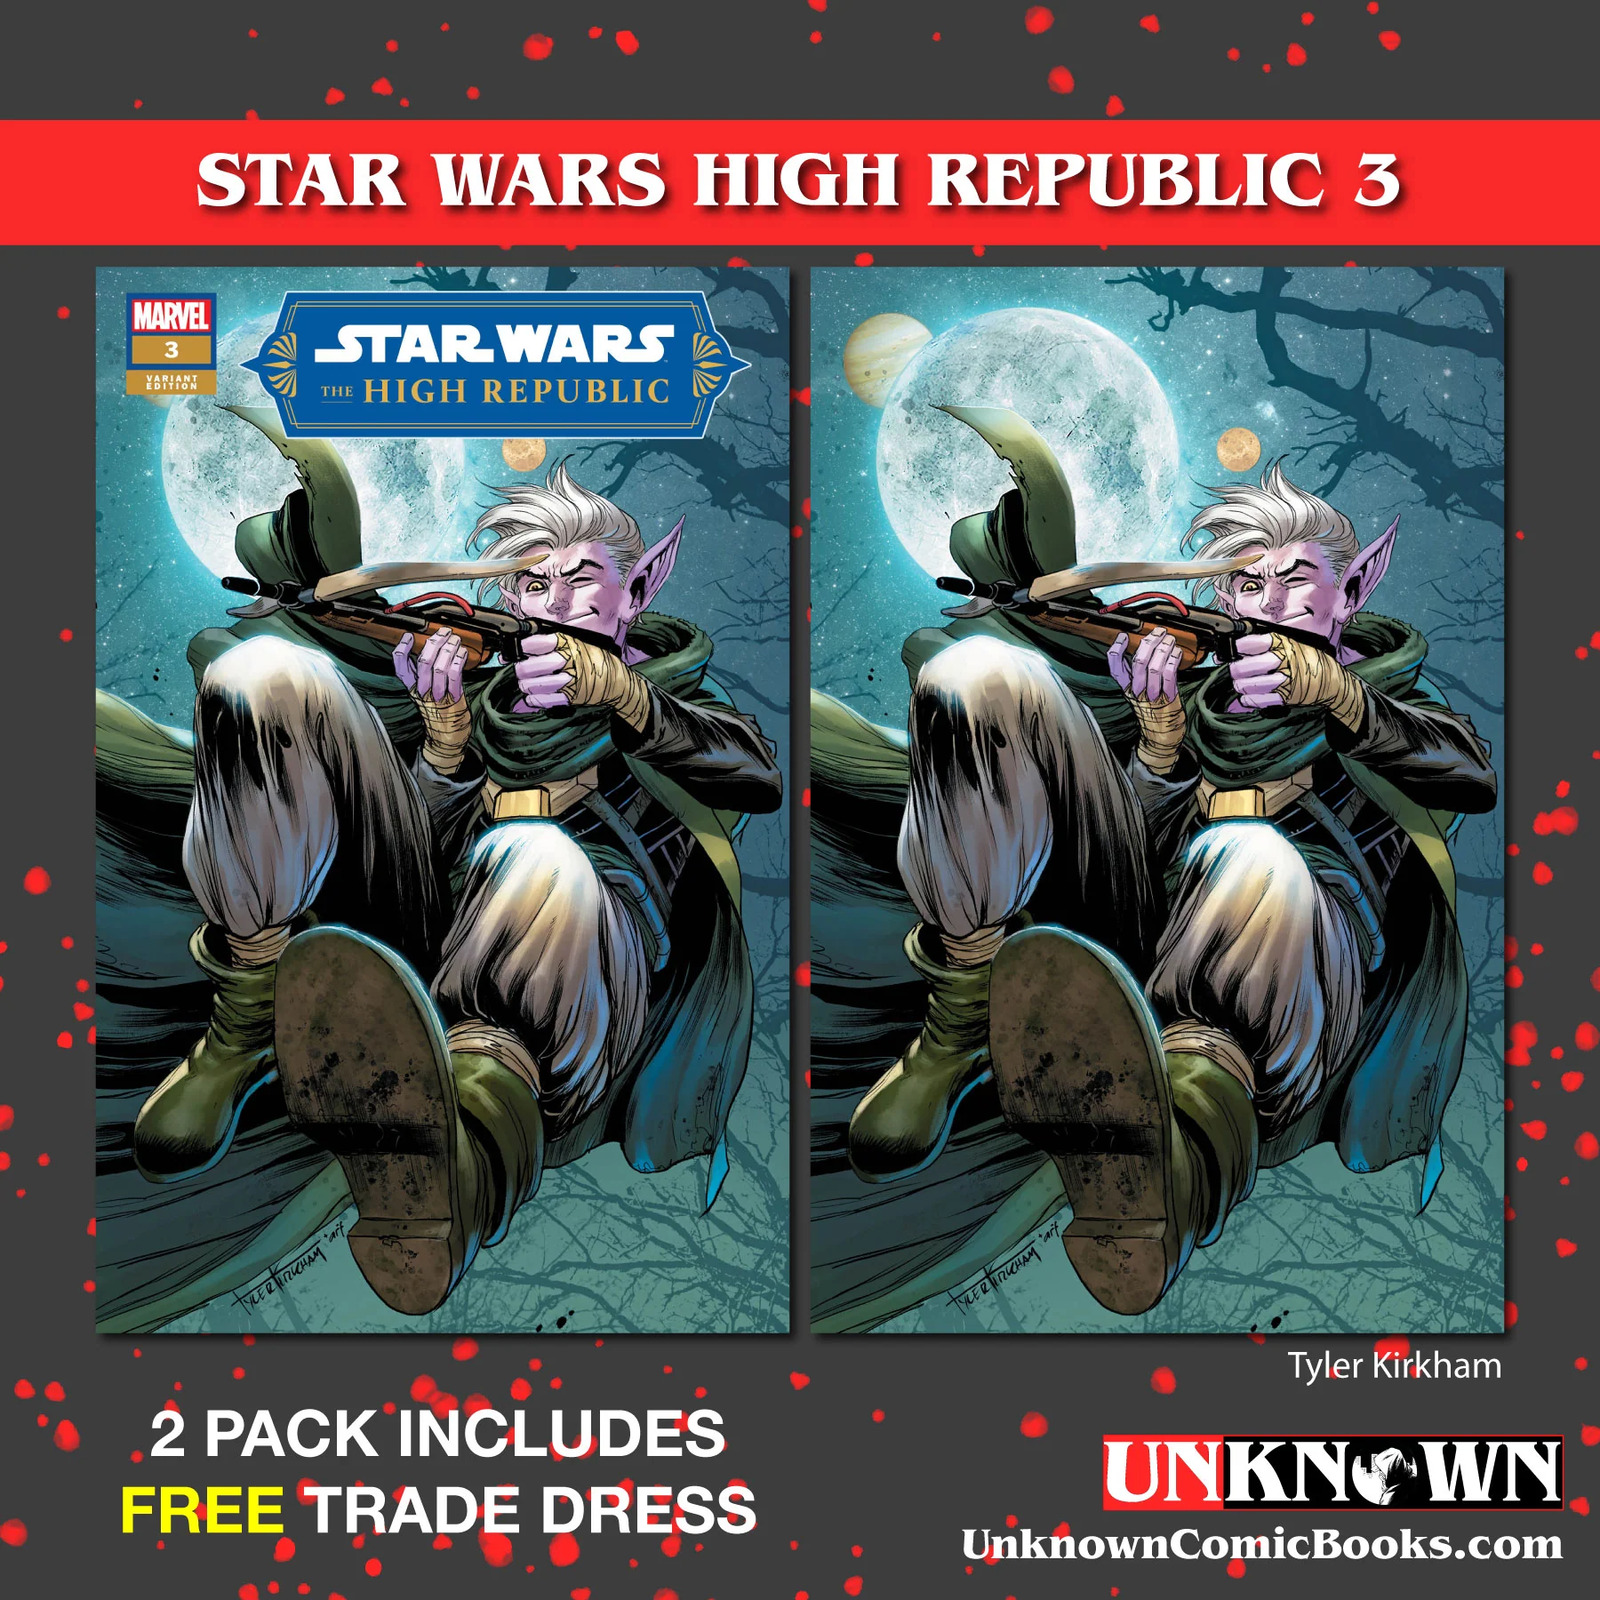 2 PACK **FREE TRADE DRESS** STAR WARS: THE HIGH REPUBLIC #3 UNKNOWN COMICS TYLER